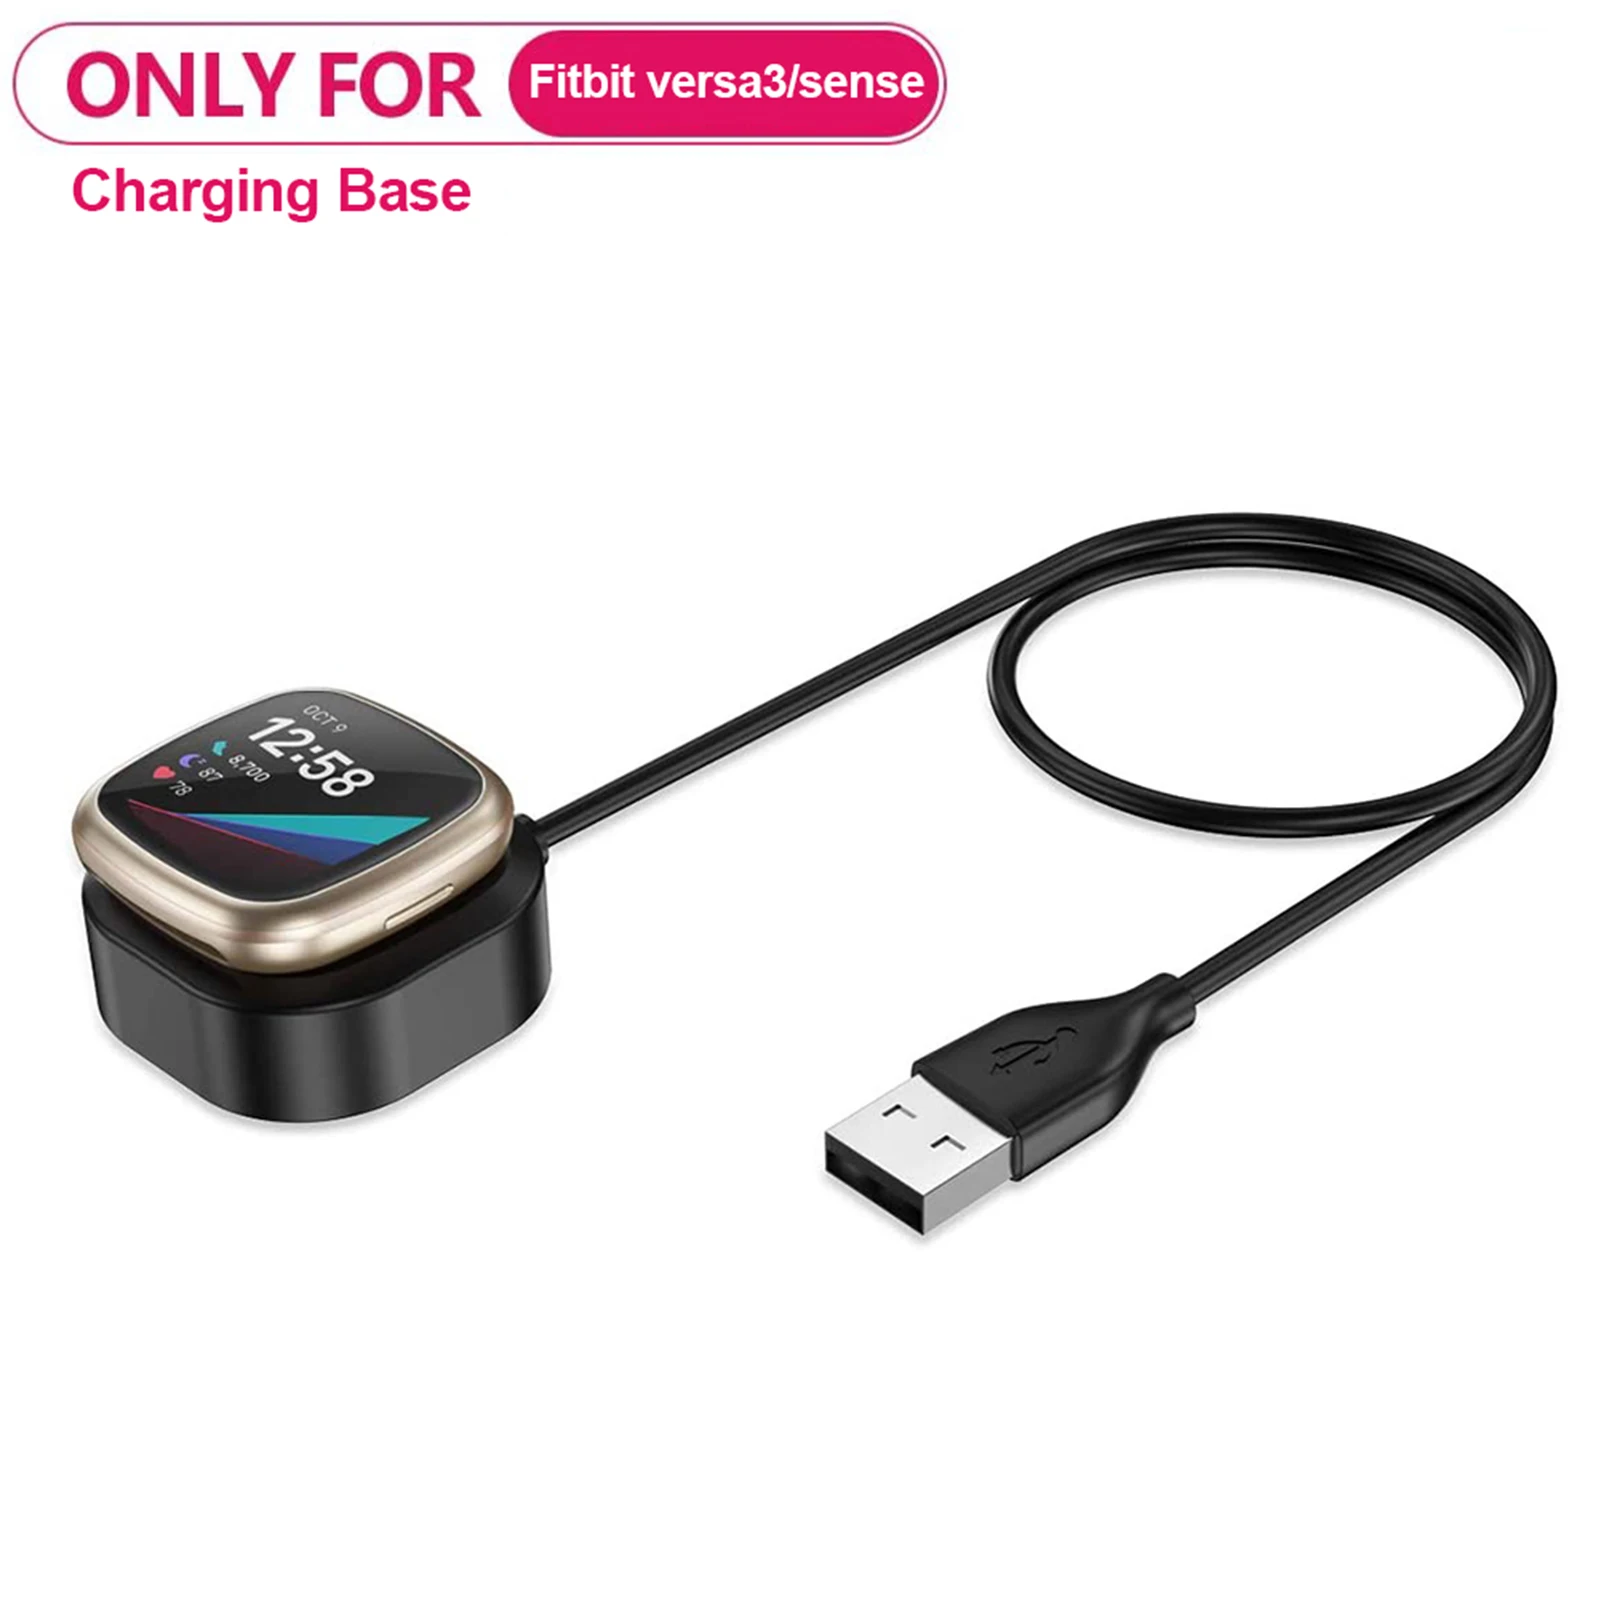 Metal USB Charging Cable Dock Cradle Station Charger for Fitbit Versa 3 Sense 